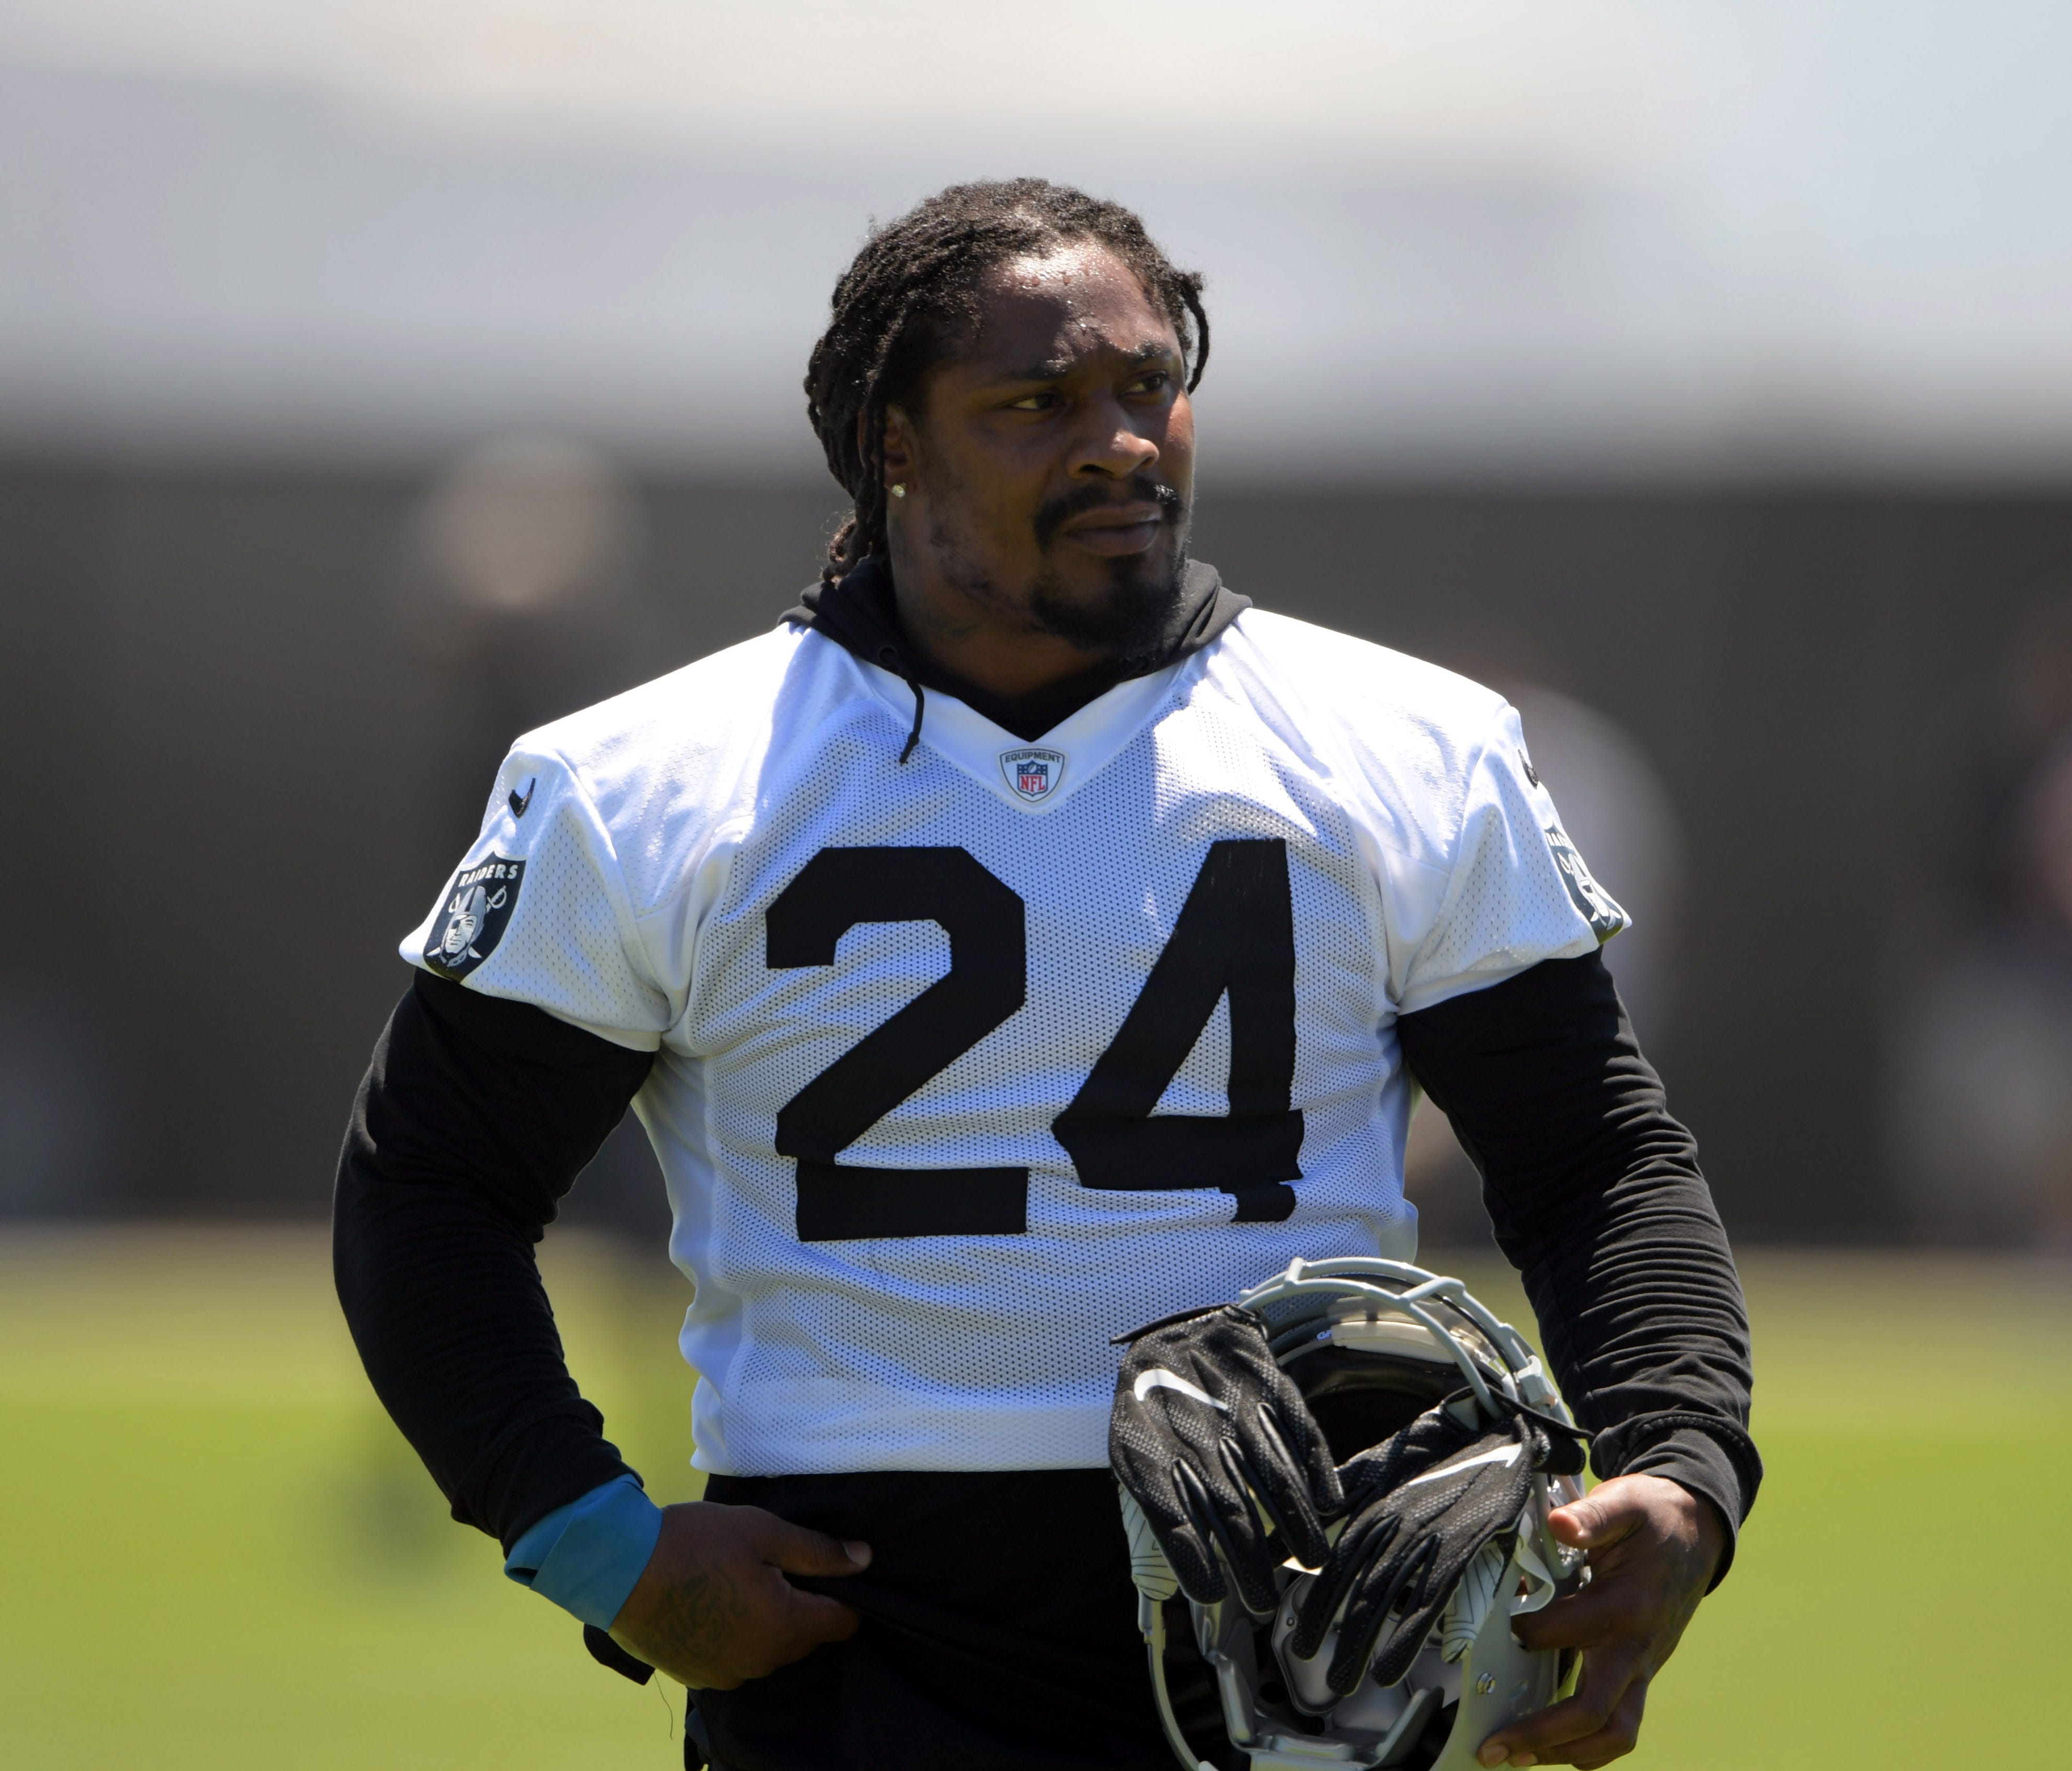 Oakland Raiders running back Marshawn Lynch (24) reacts during minicamp at the Raiders practice facility.